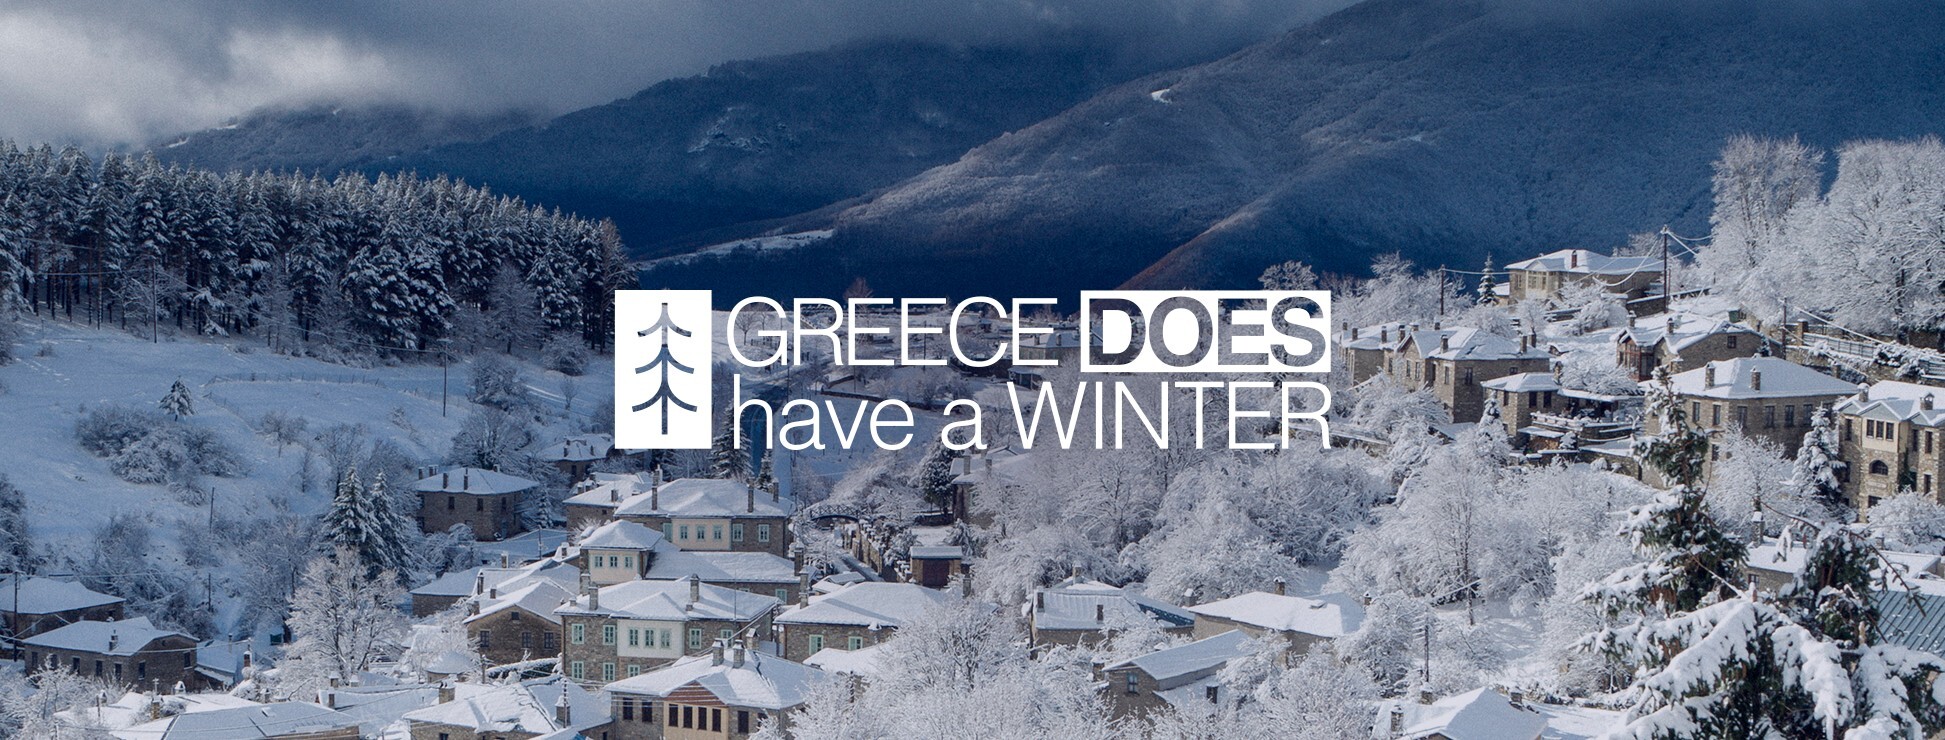 Greece Does Have A Winter